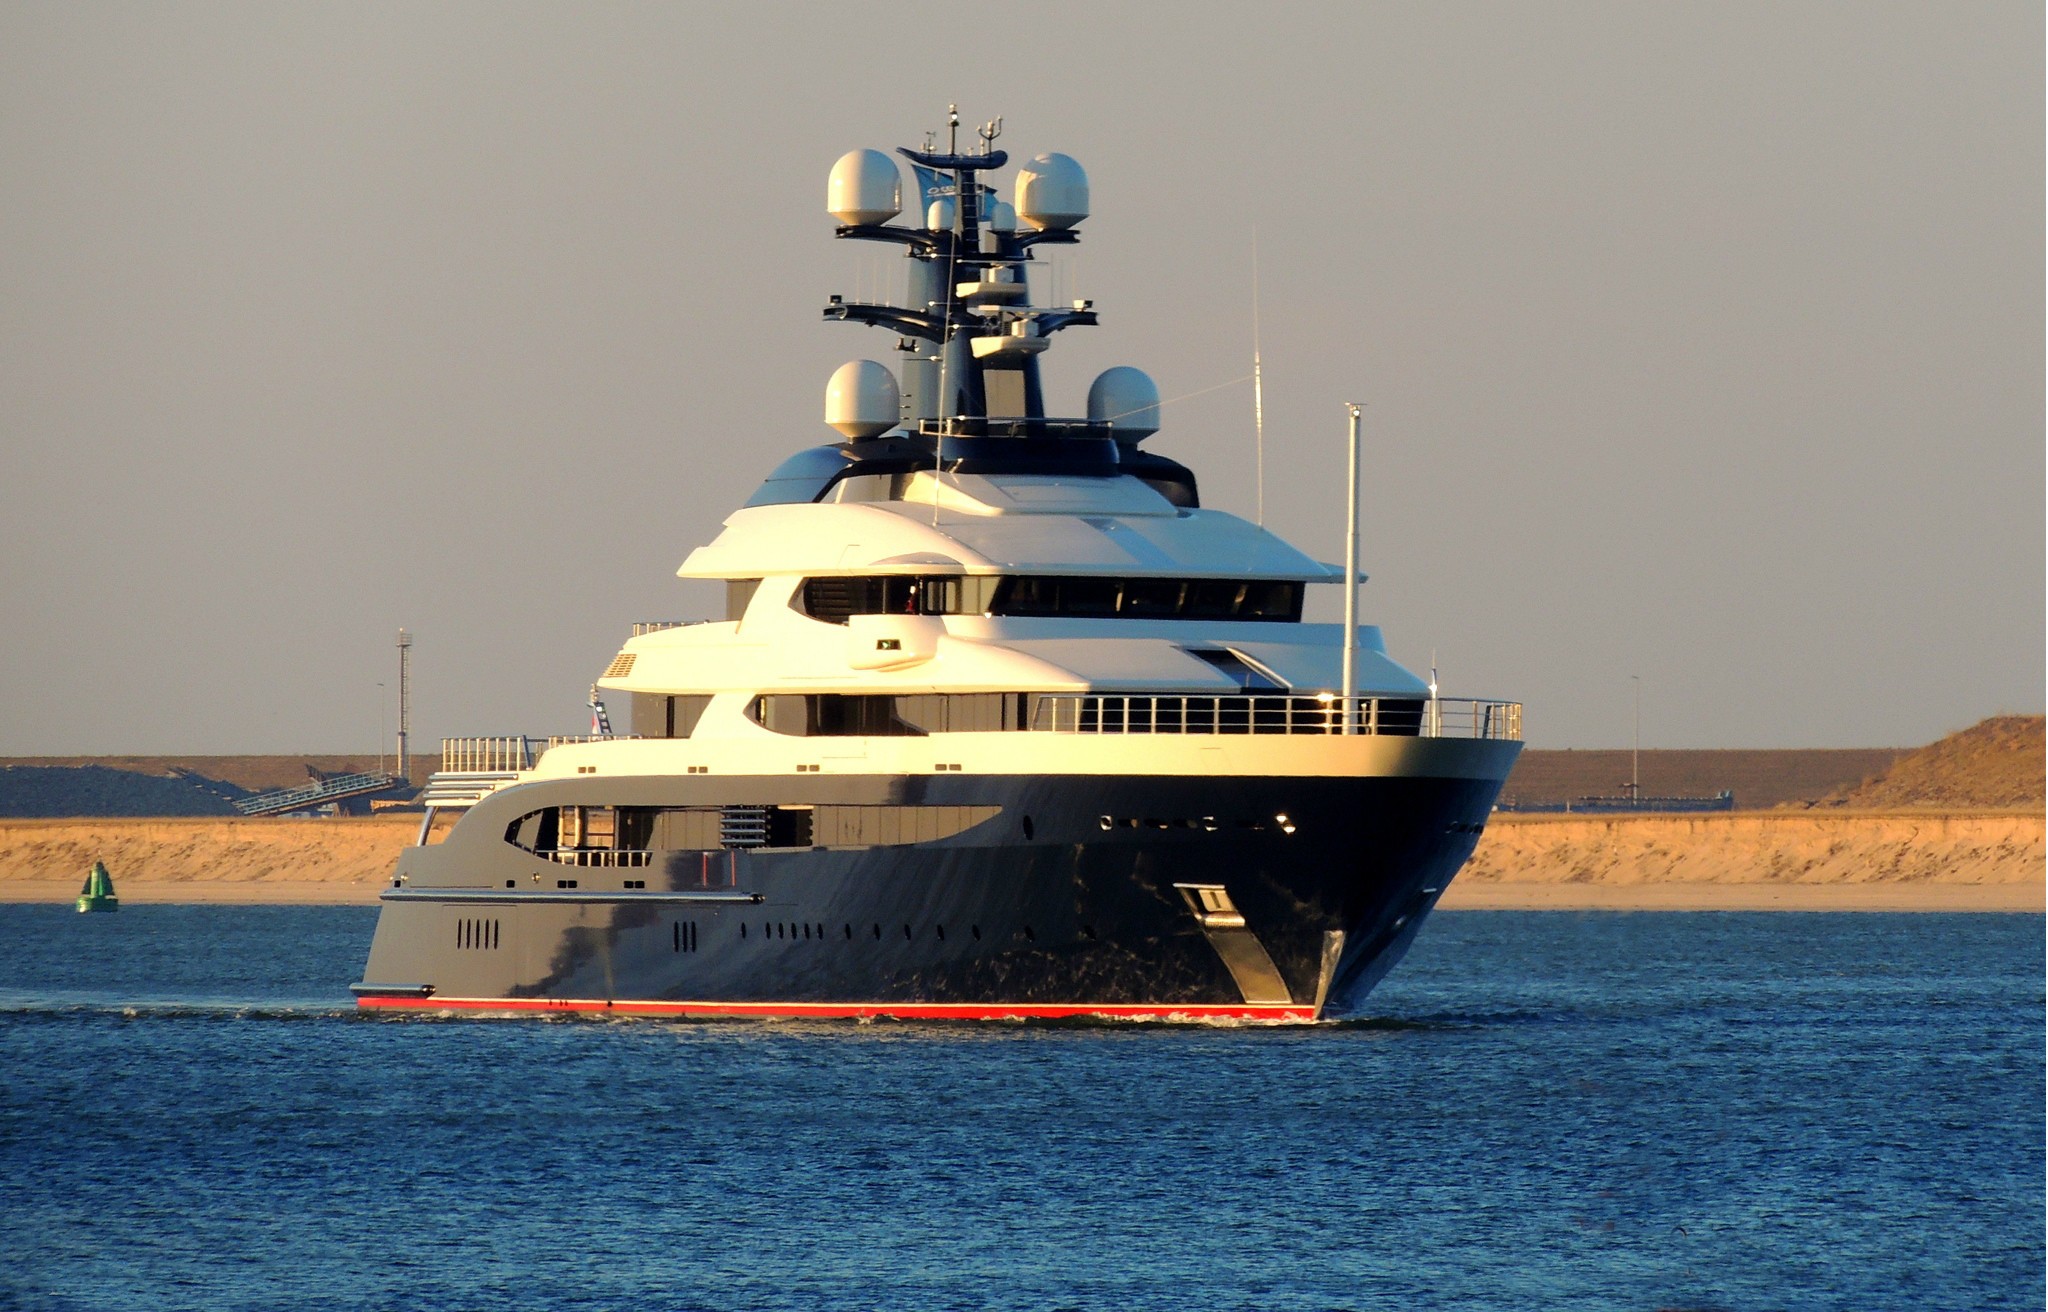 superyacht equanimity cost